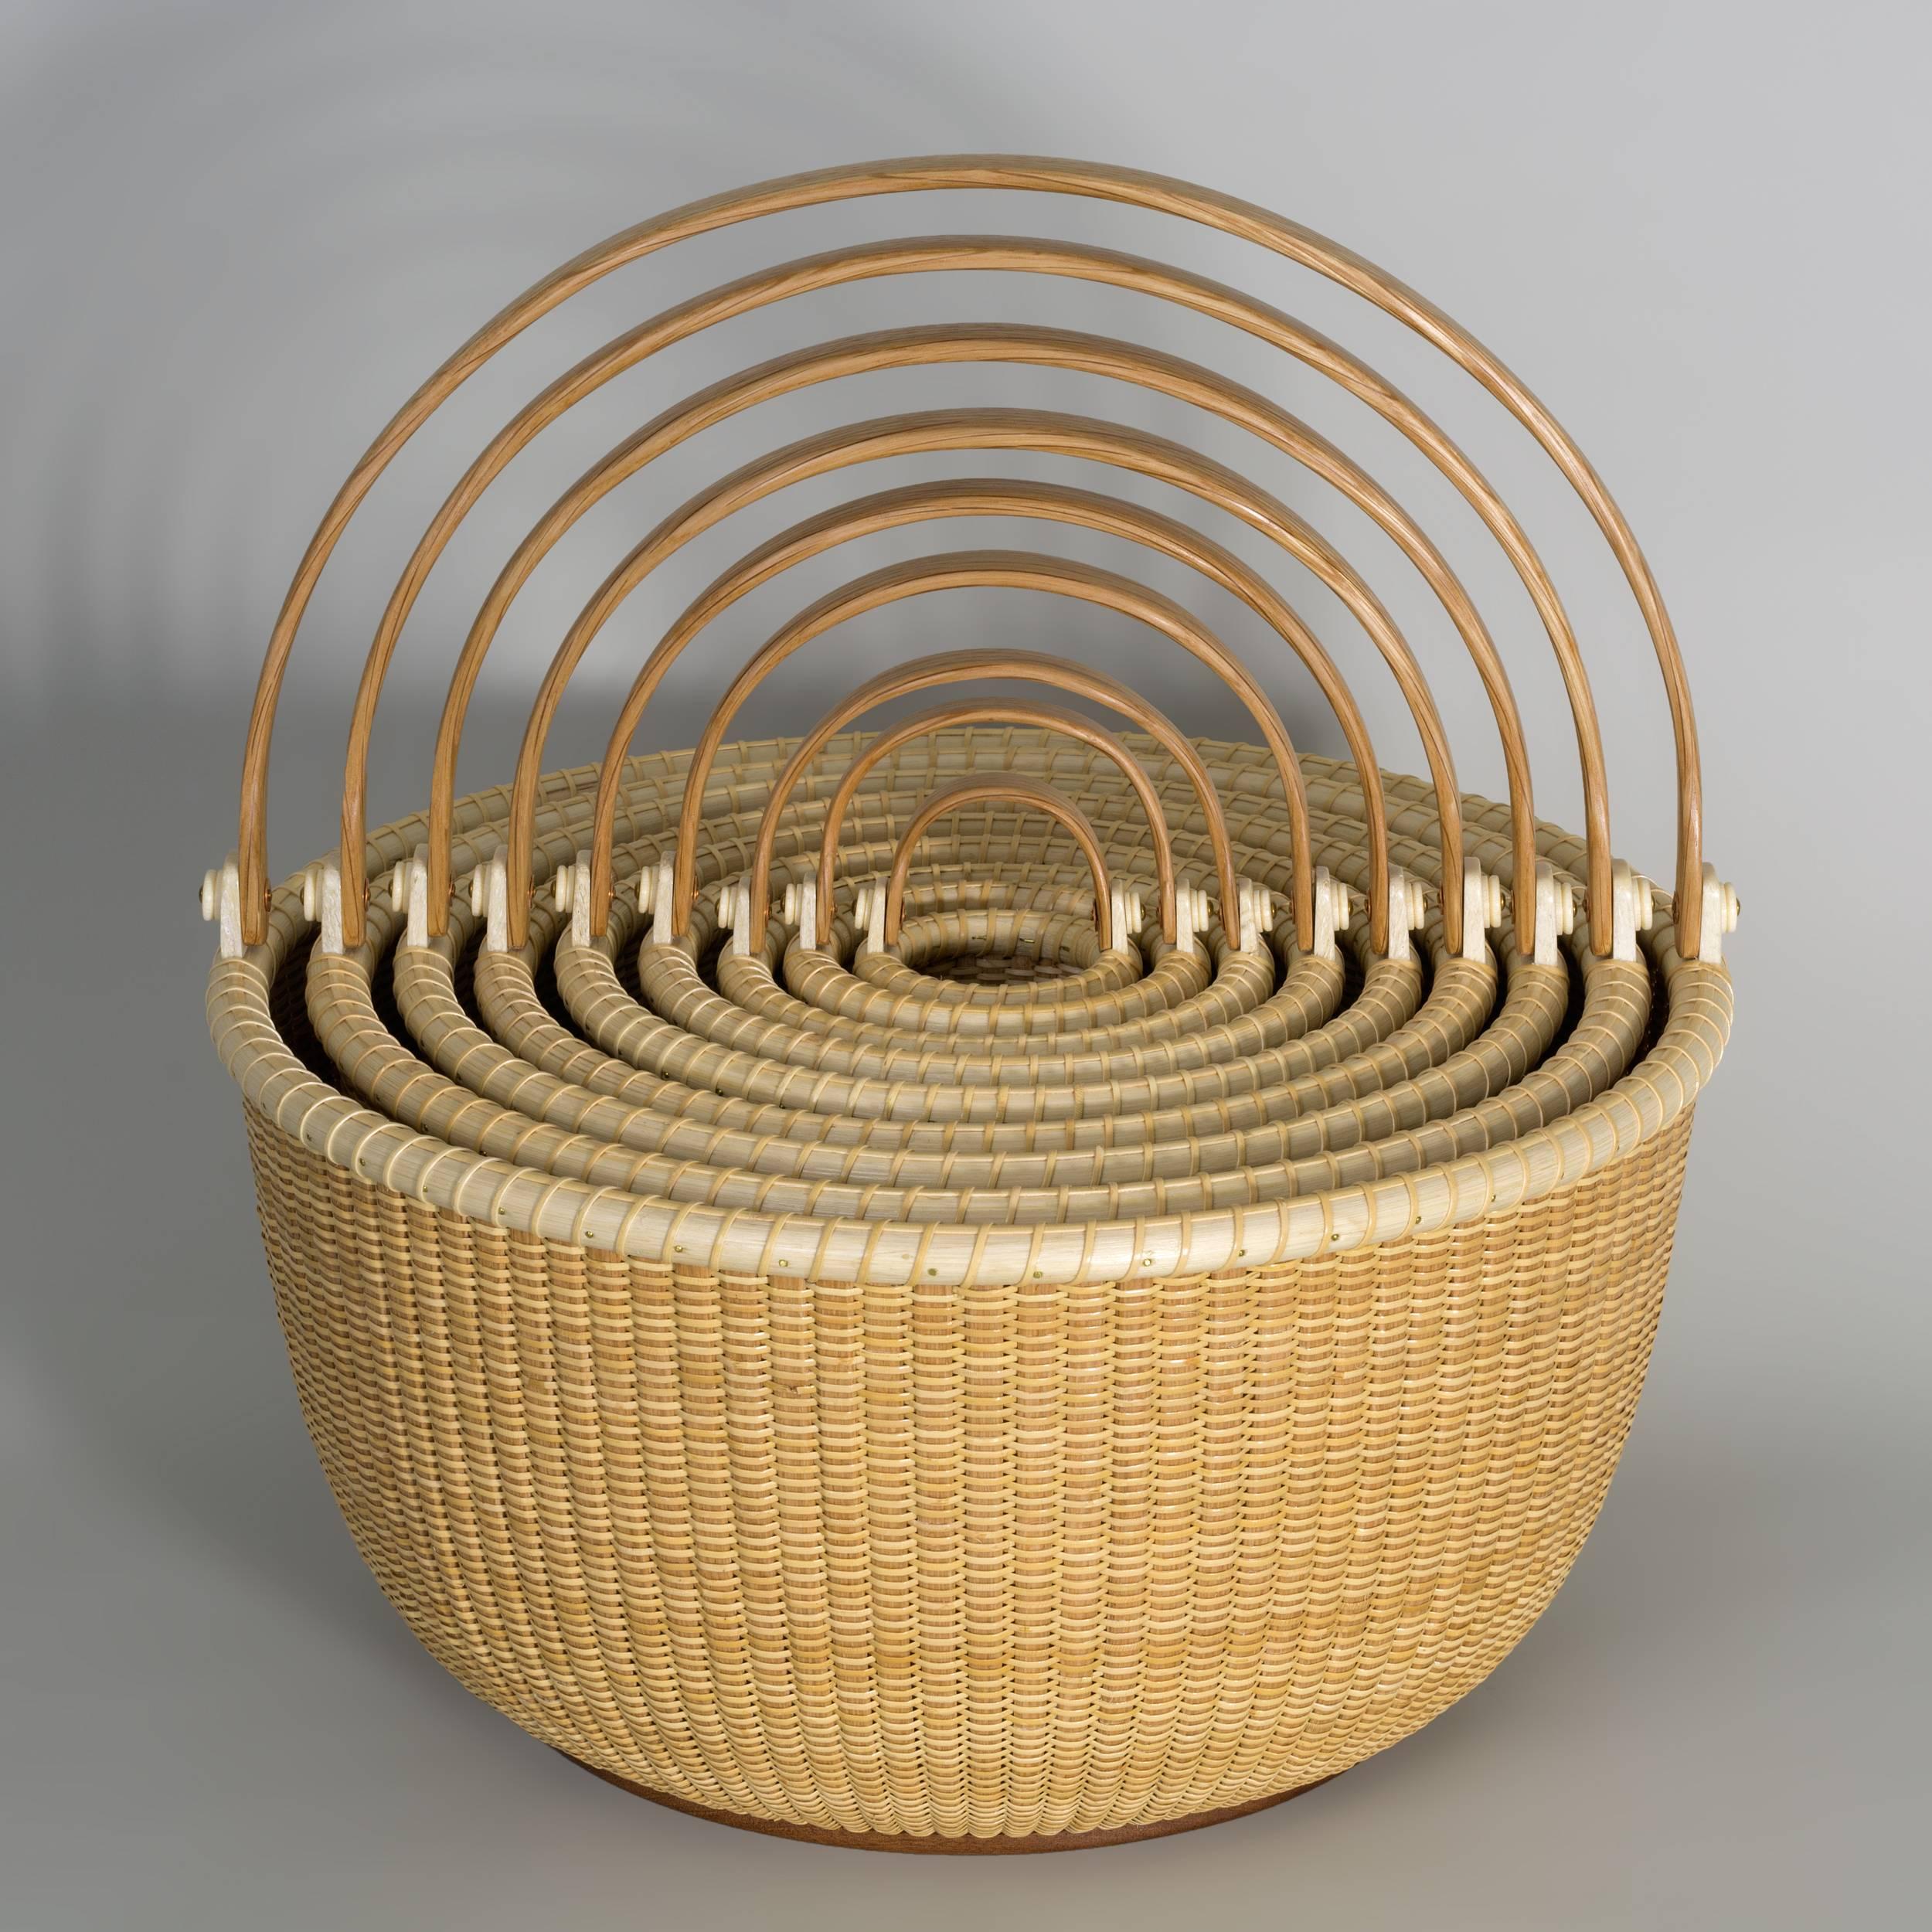 Classic nest of nine baskets by highly collected contemporary Nantucket artists Bill and Judy Sayle, who have been producing these works of art for over 40 years.  Each basket is meticulously crafted with carved and bent swing handles, bone ears,